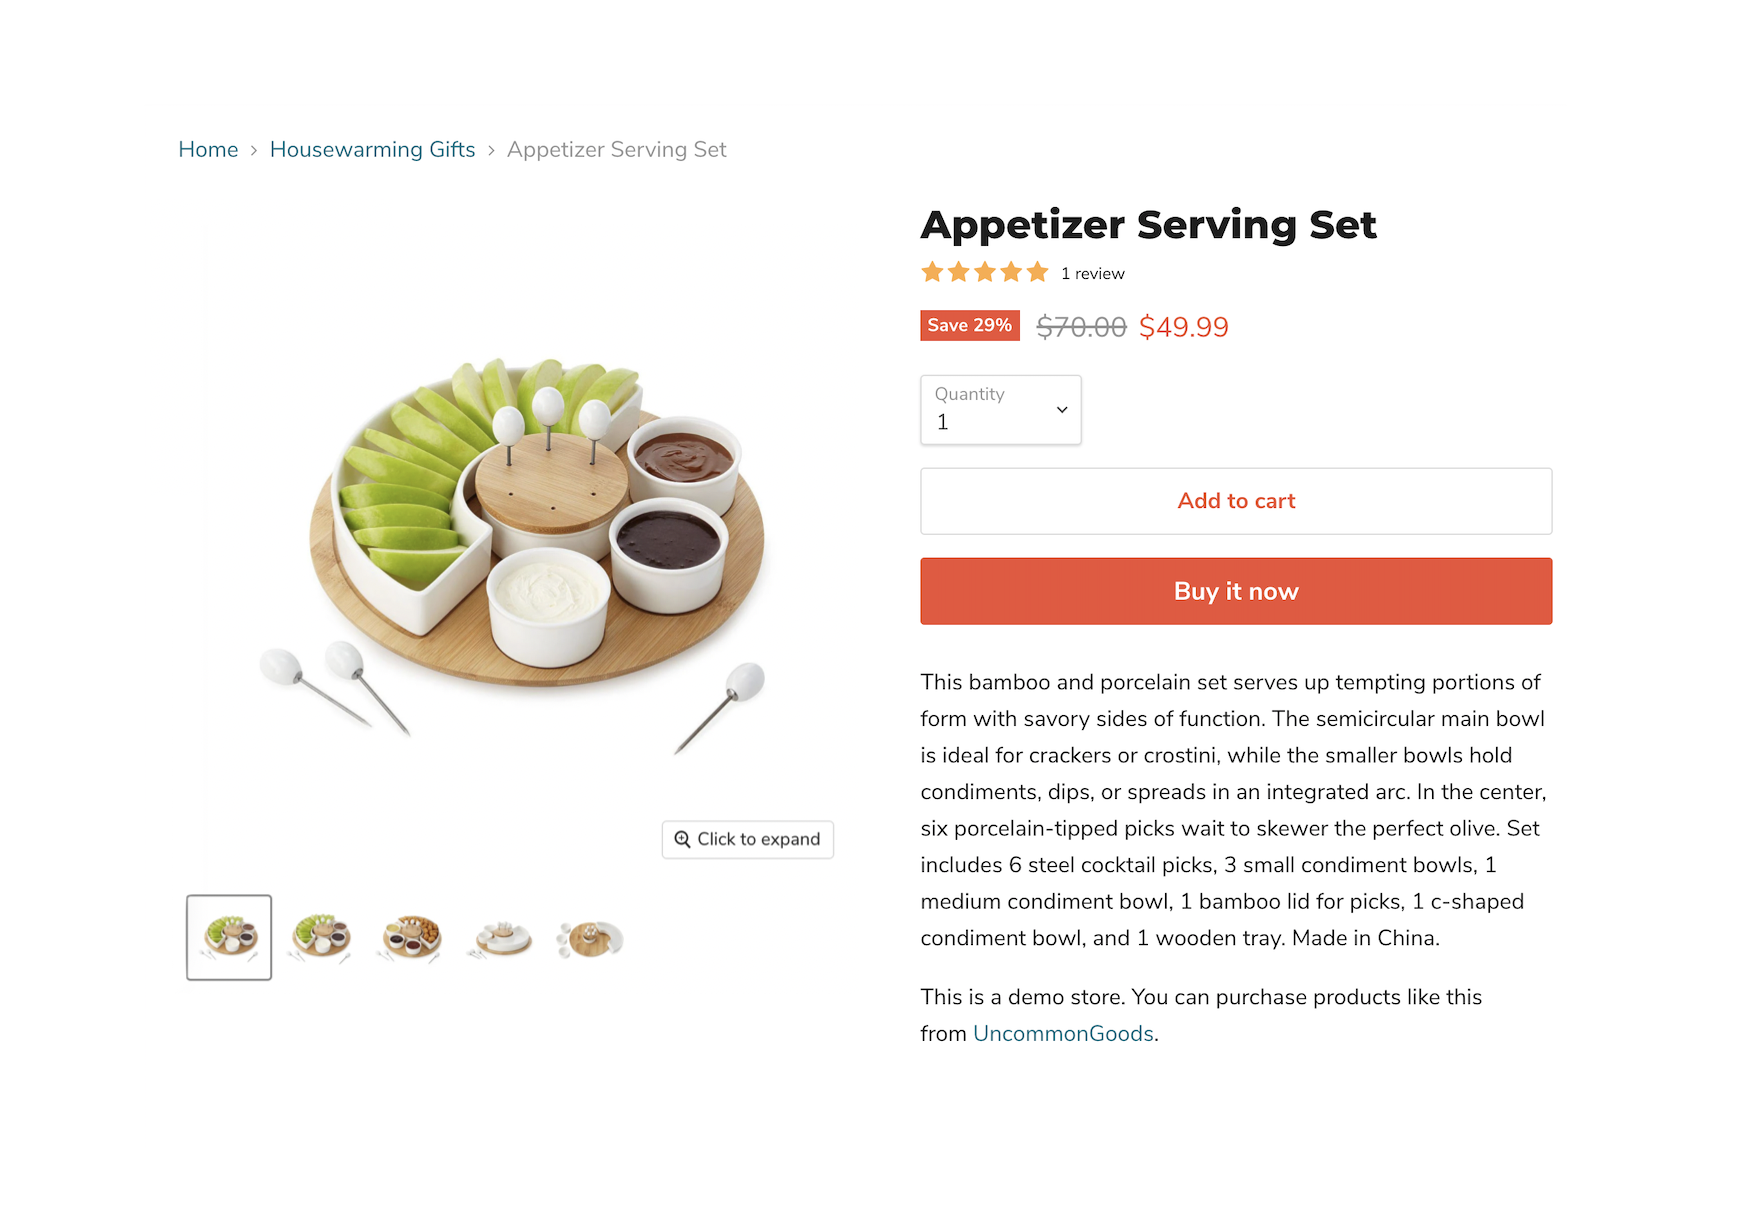 serving_set_product_page_with_media_gallery_and_info.png